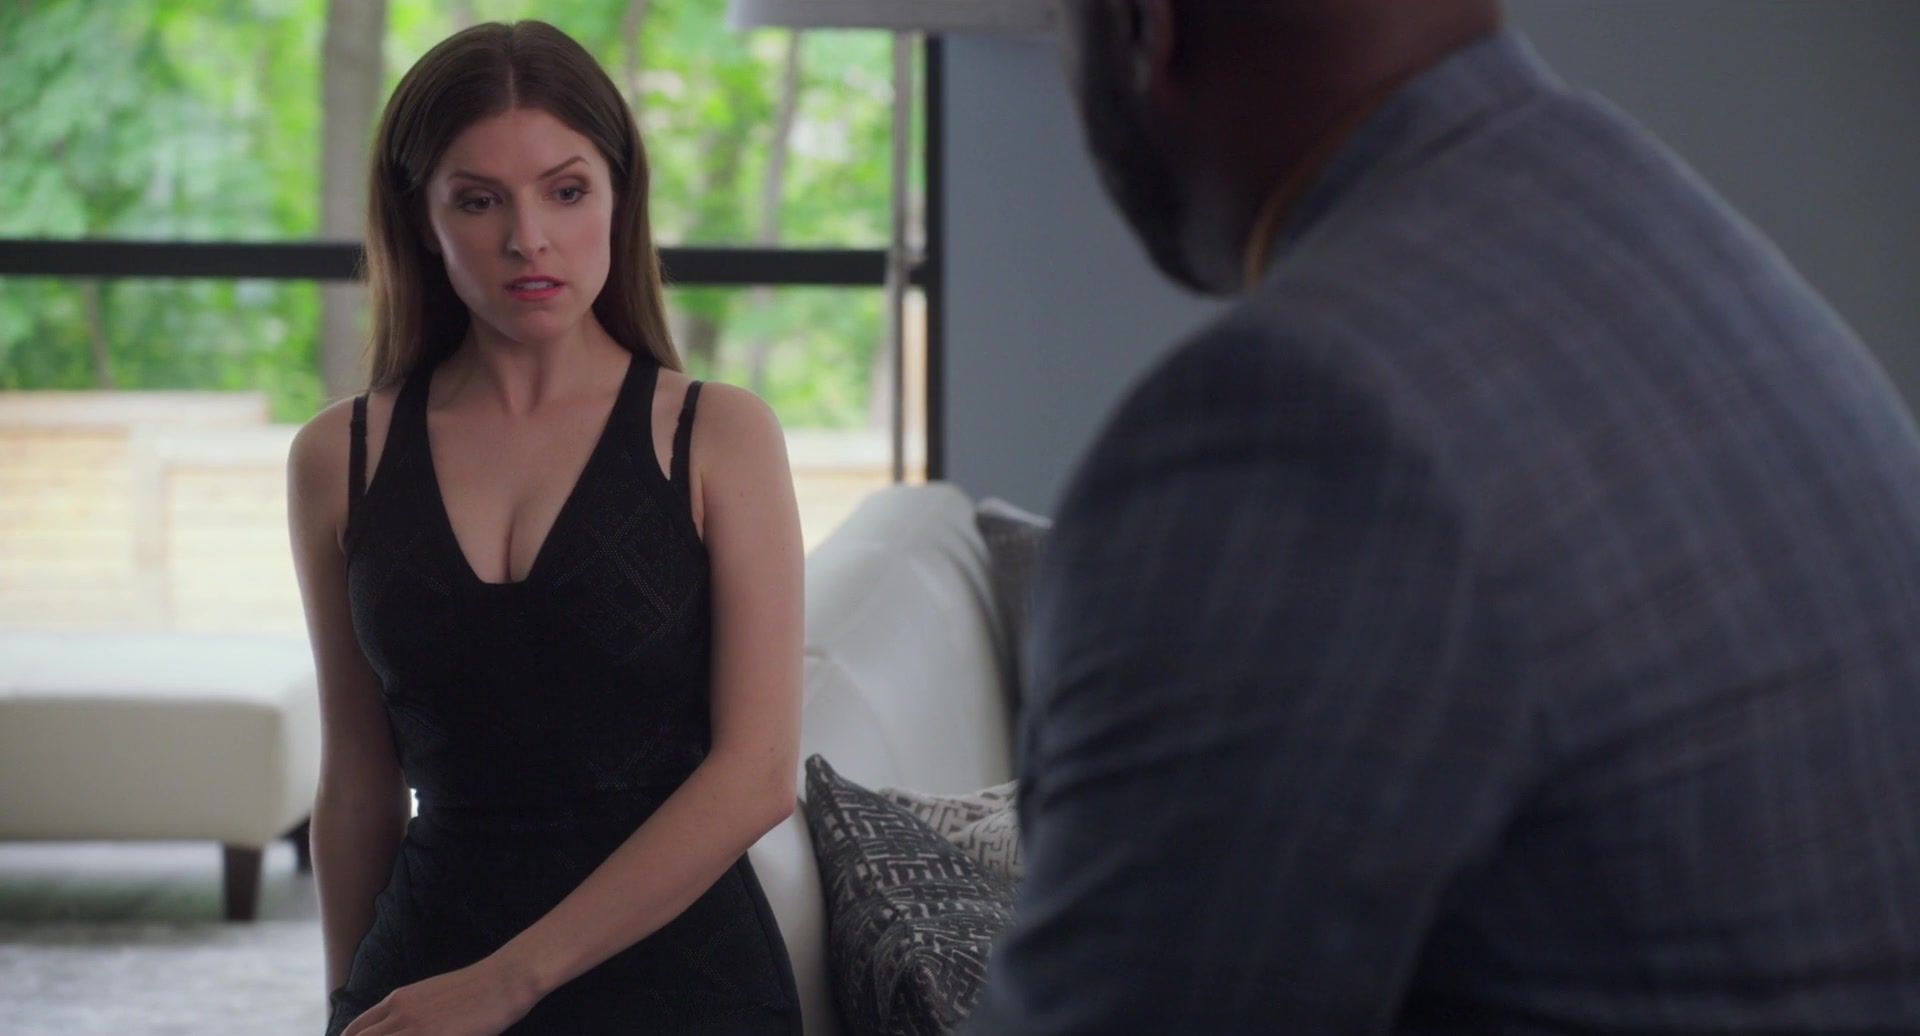 Big Tits Anna Kendrick, Blake Lively nude - A Simple Favor (2018) Real Orgasms - 2